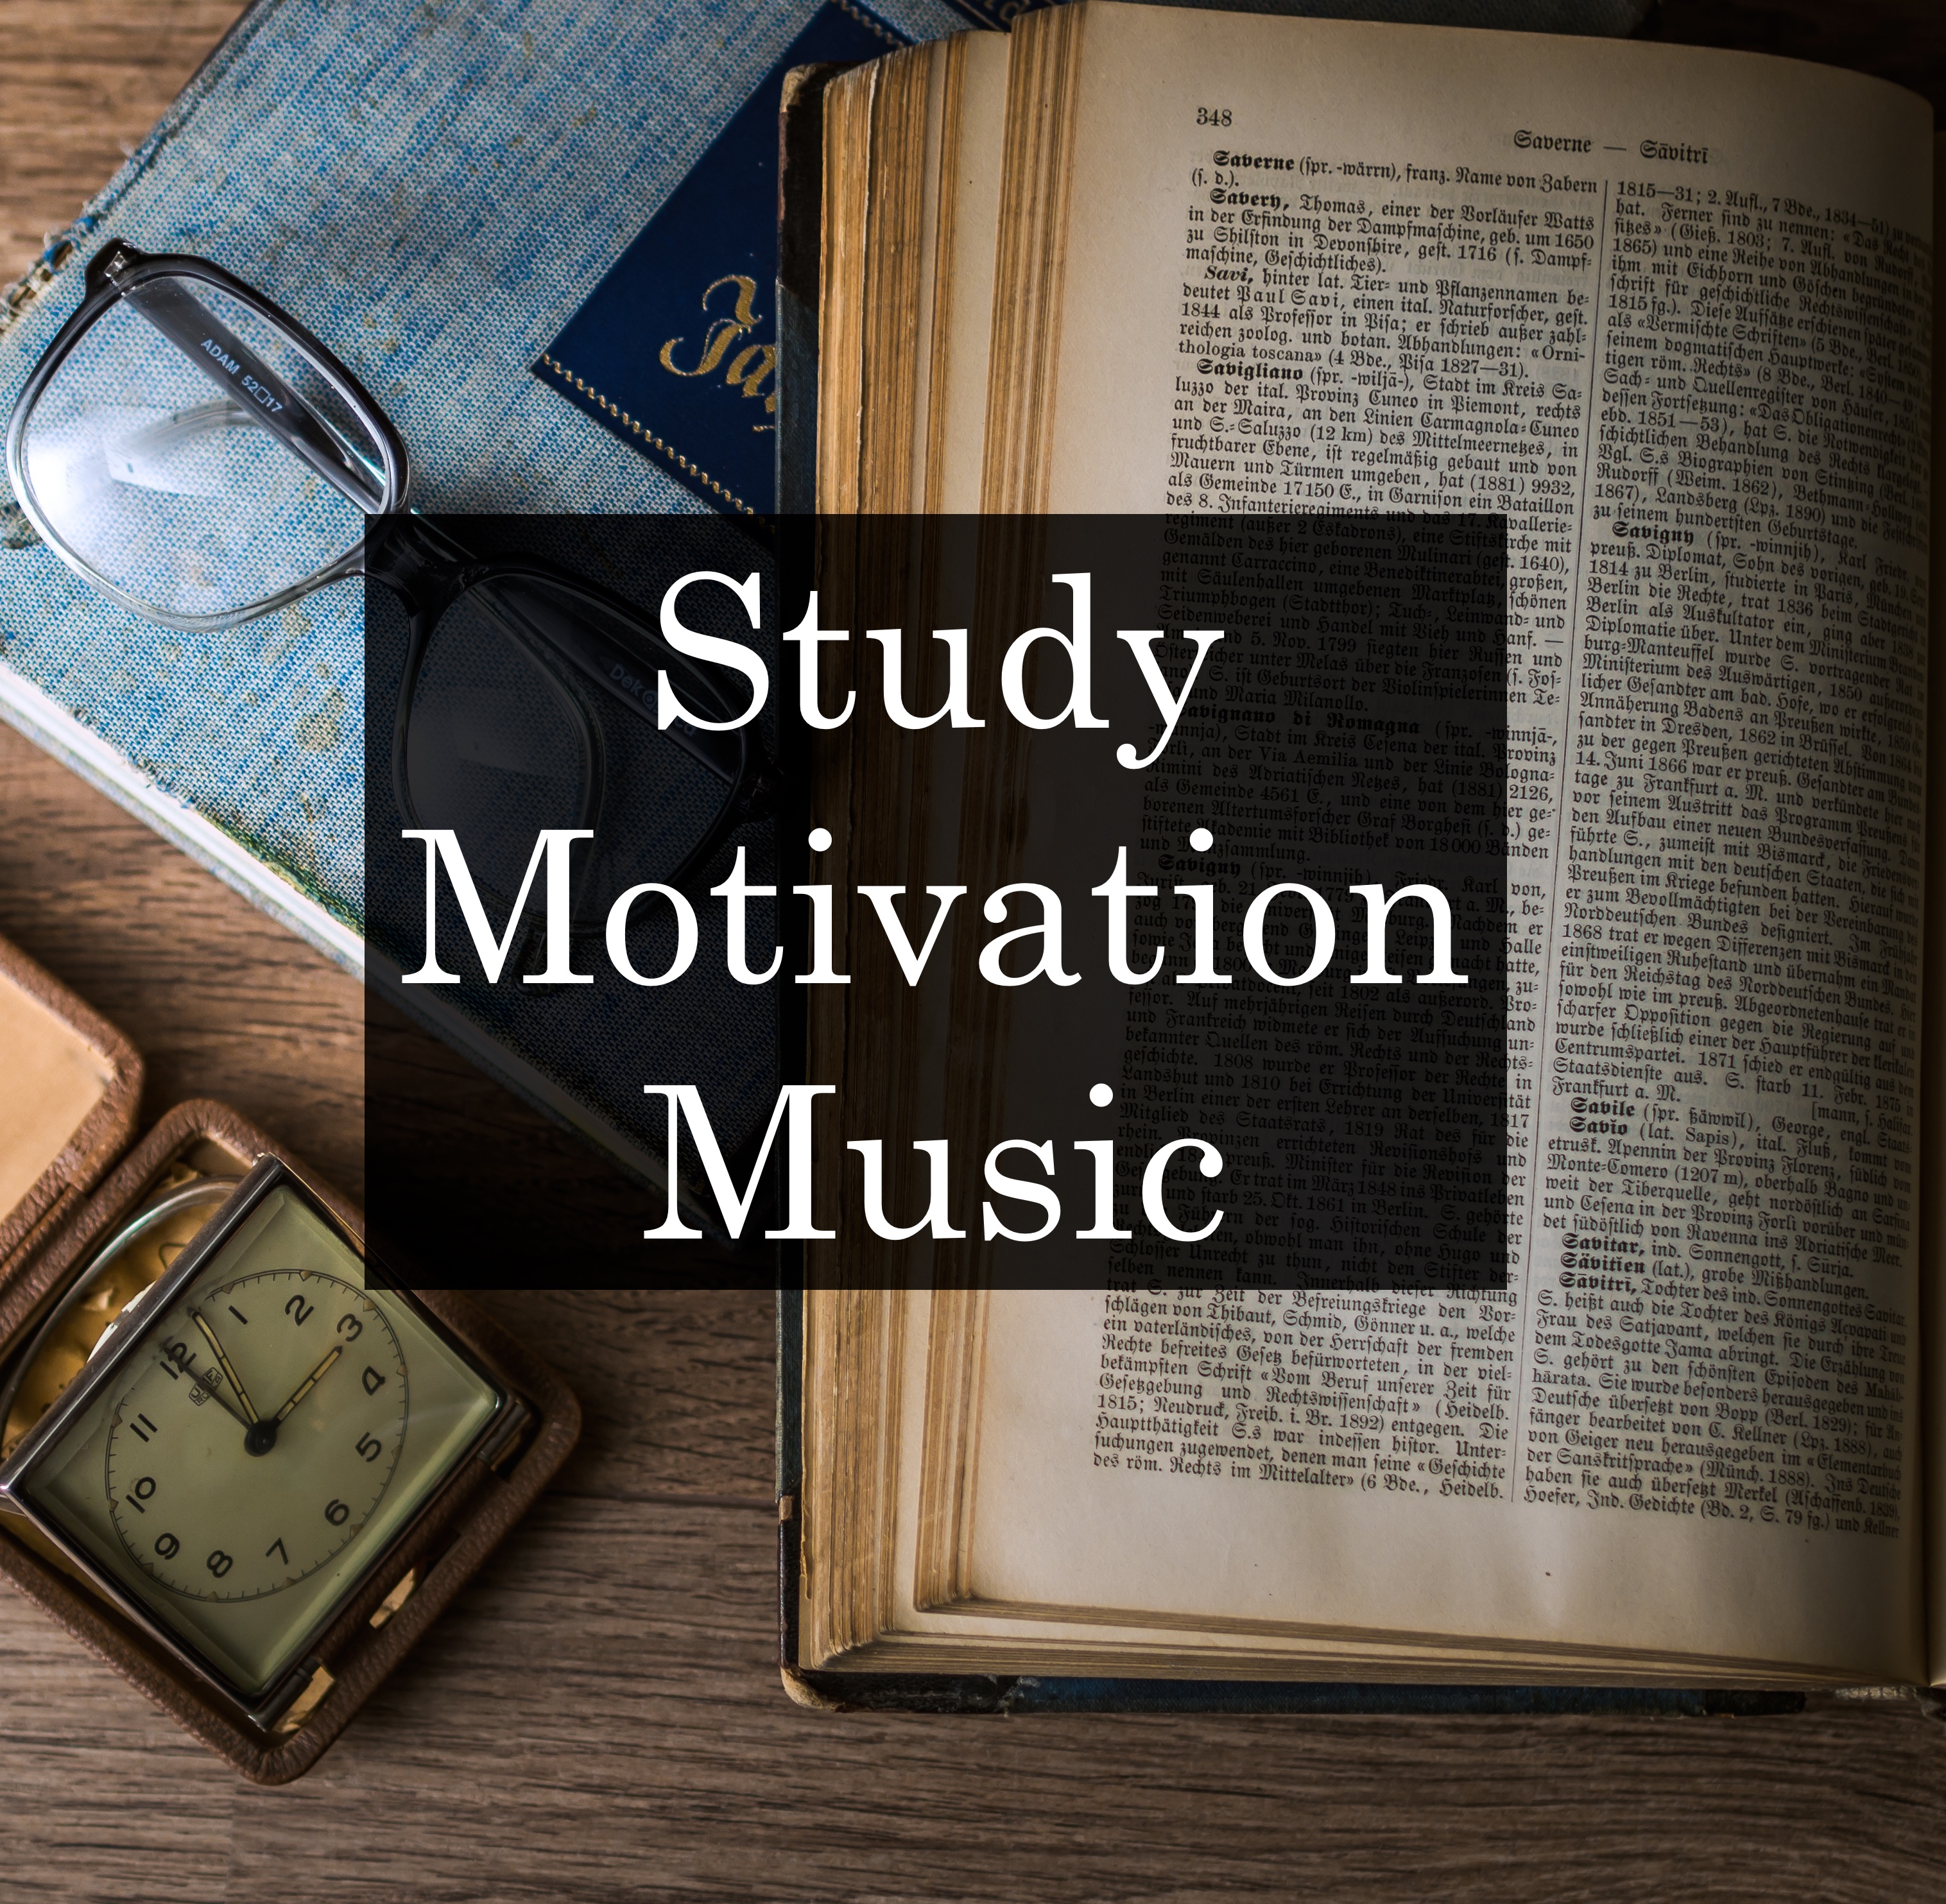 Study Motivation Music  - Relaxing Sounds for Maximum Brain Function and Comprehension, Inspiring Deep Focus for Creativity and Exam Success